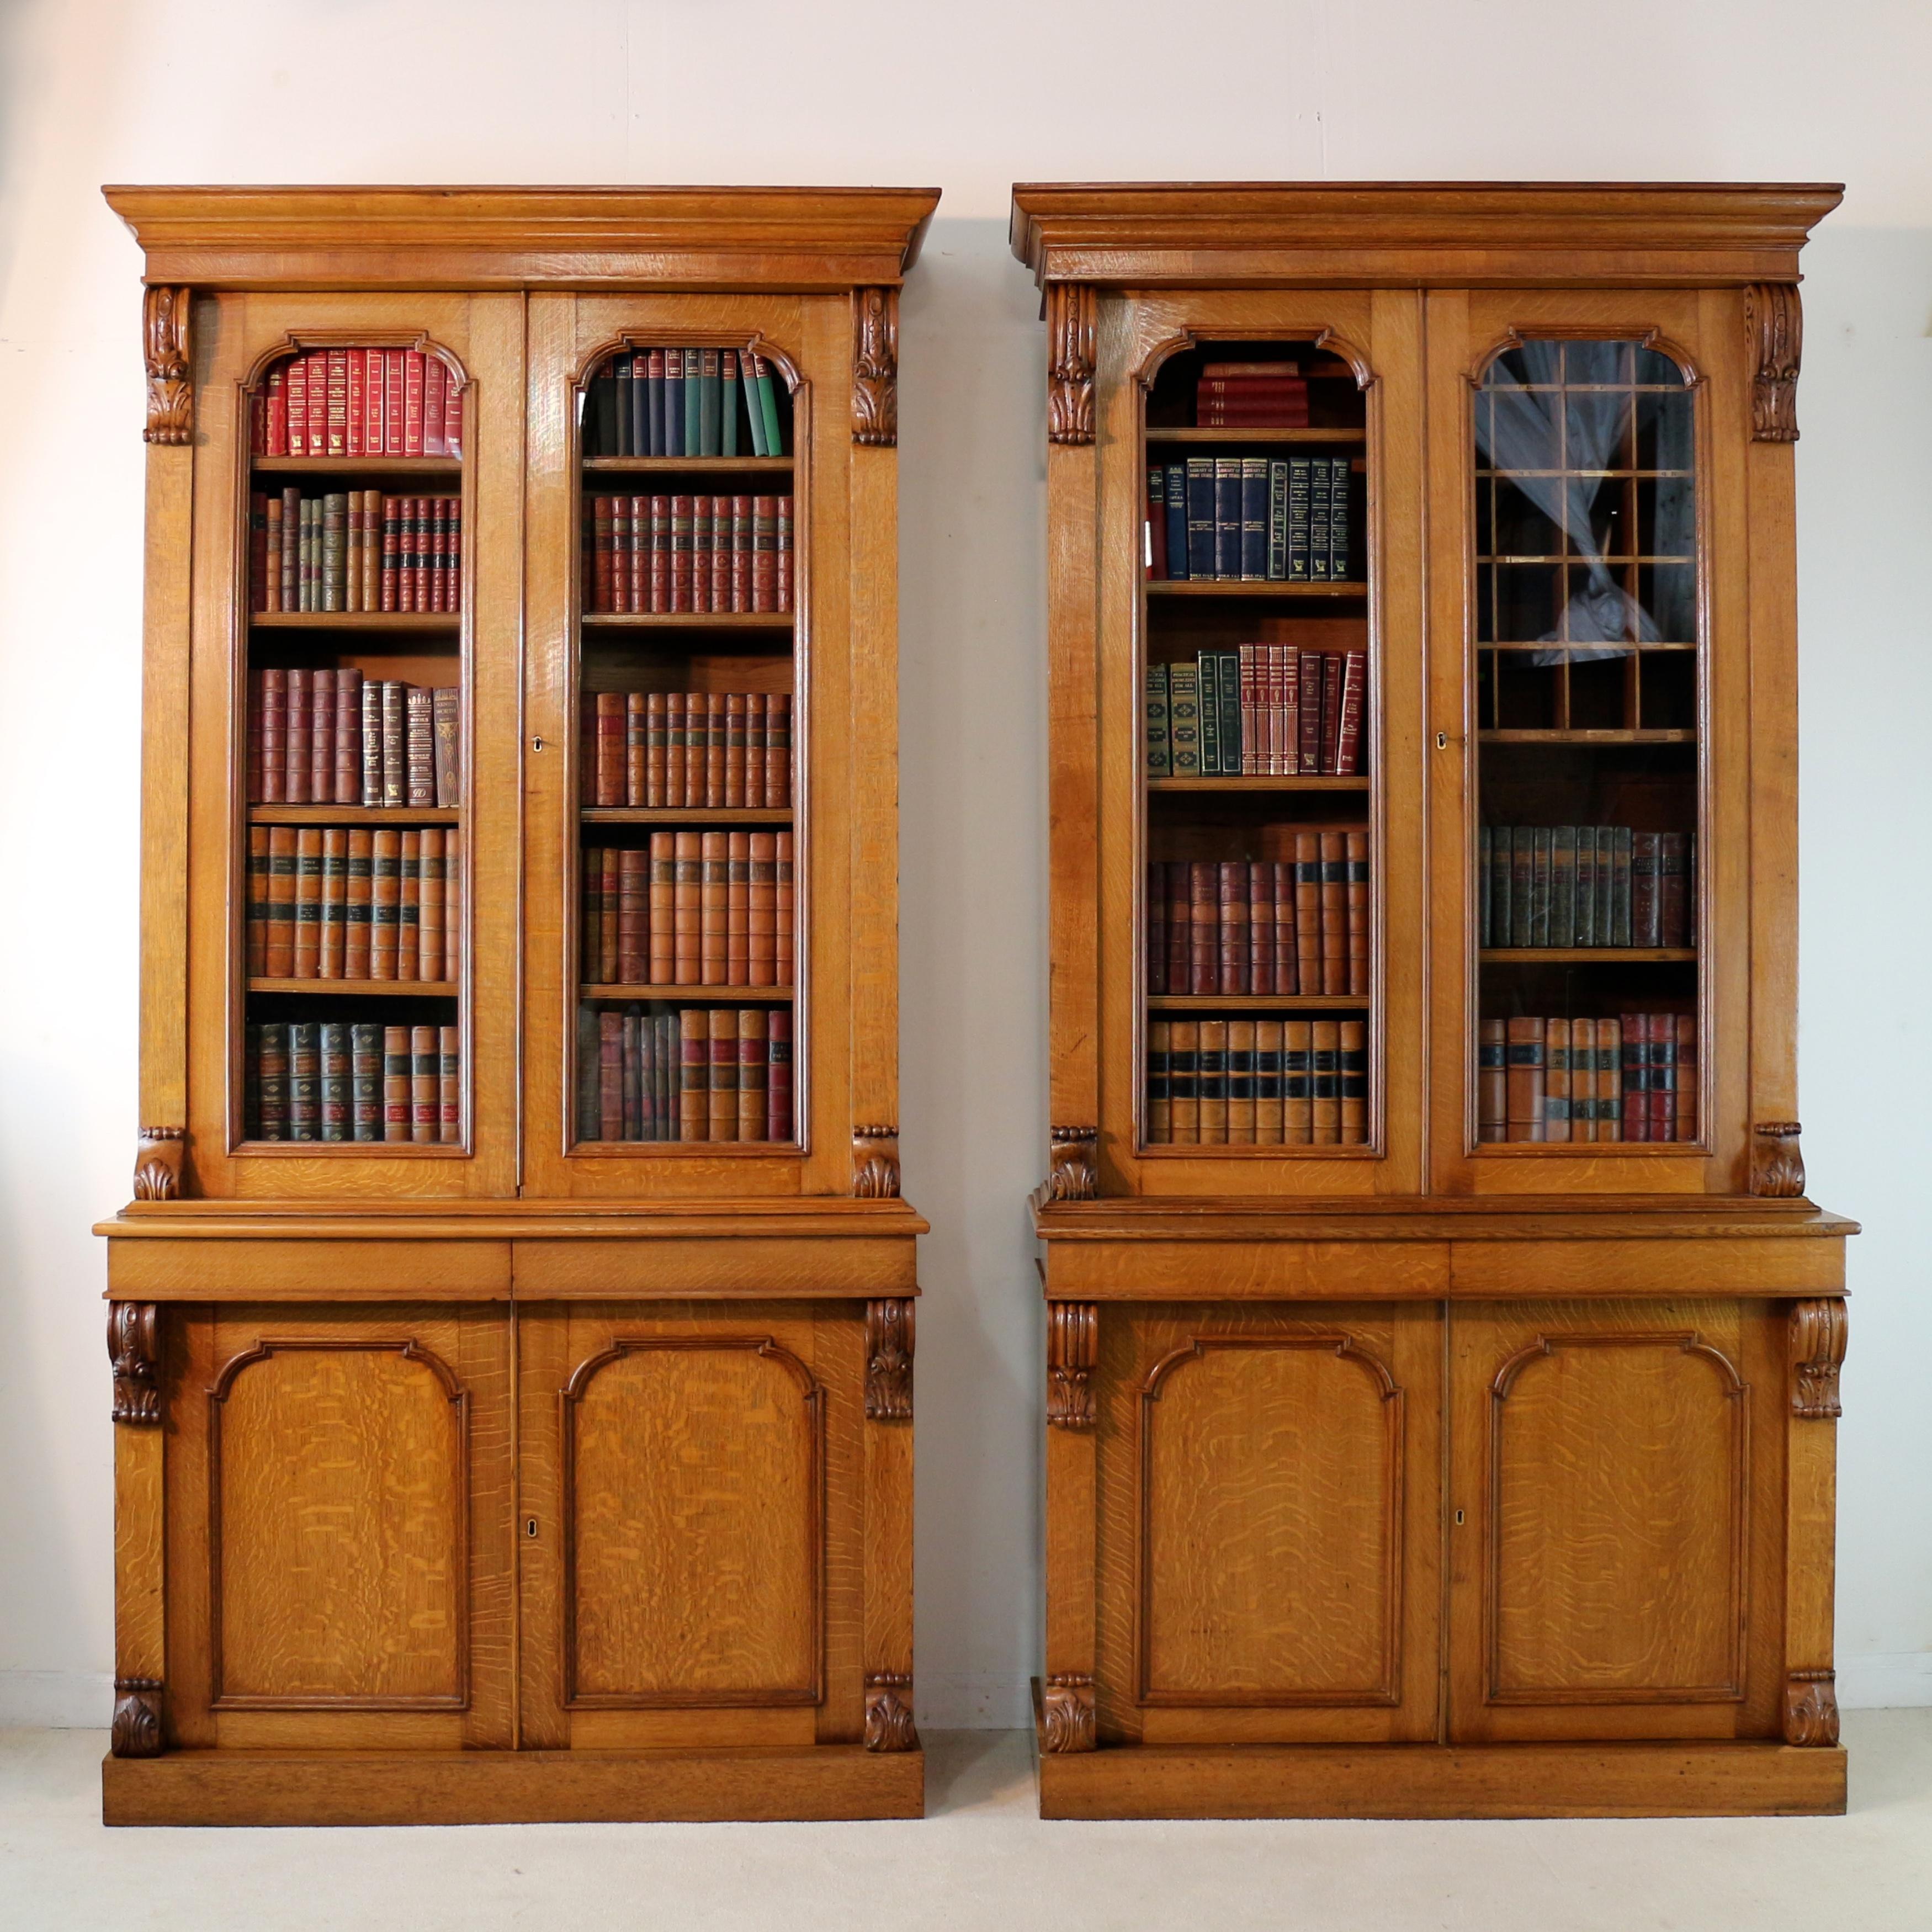 A rare pair of Irish William IV estate library bookcases by J J Byrne of Dublin. In golden quarter-sawn oak with attractive ‘tiger grain’ or medullary rays. Featuring decorative carved scrolling corbels, each has a square cornered moulded cornice